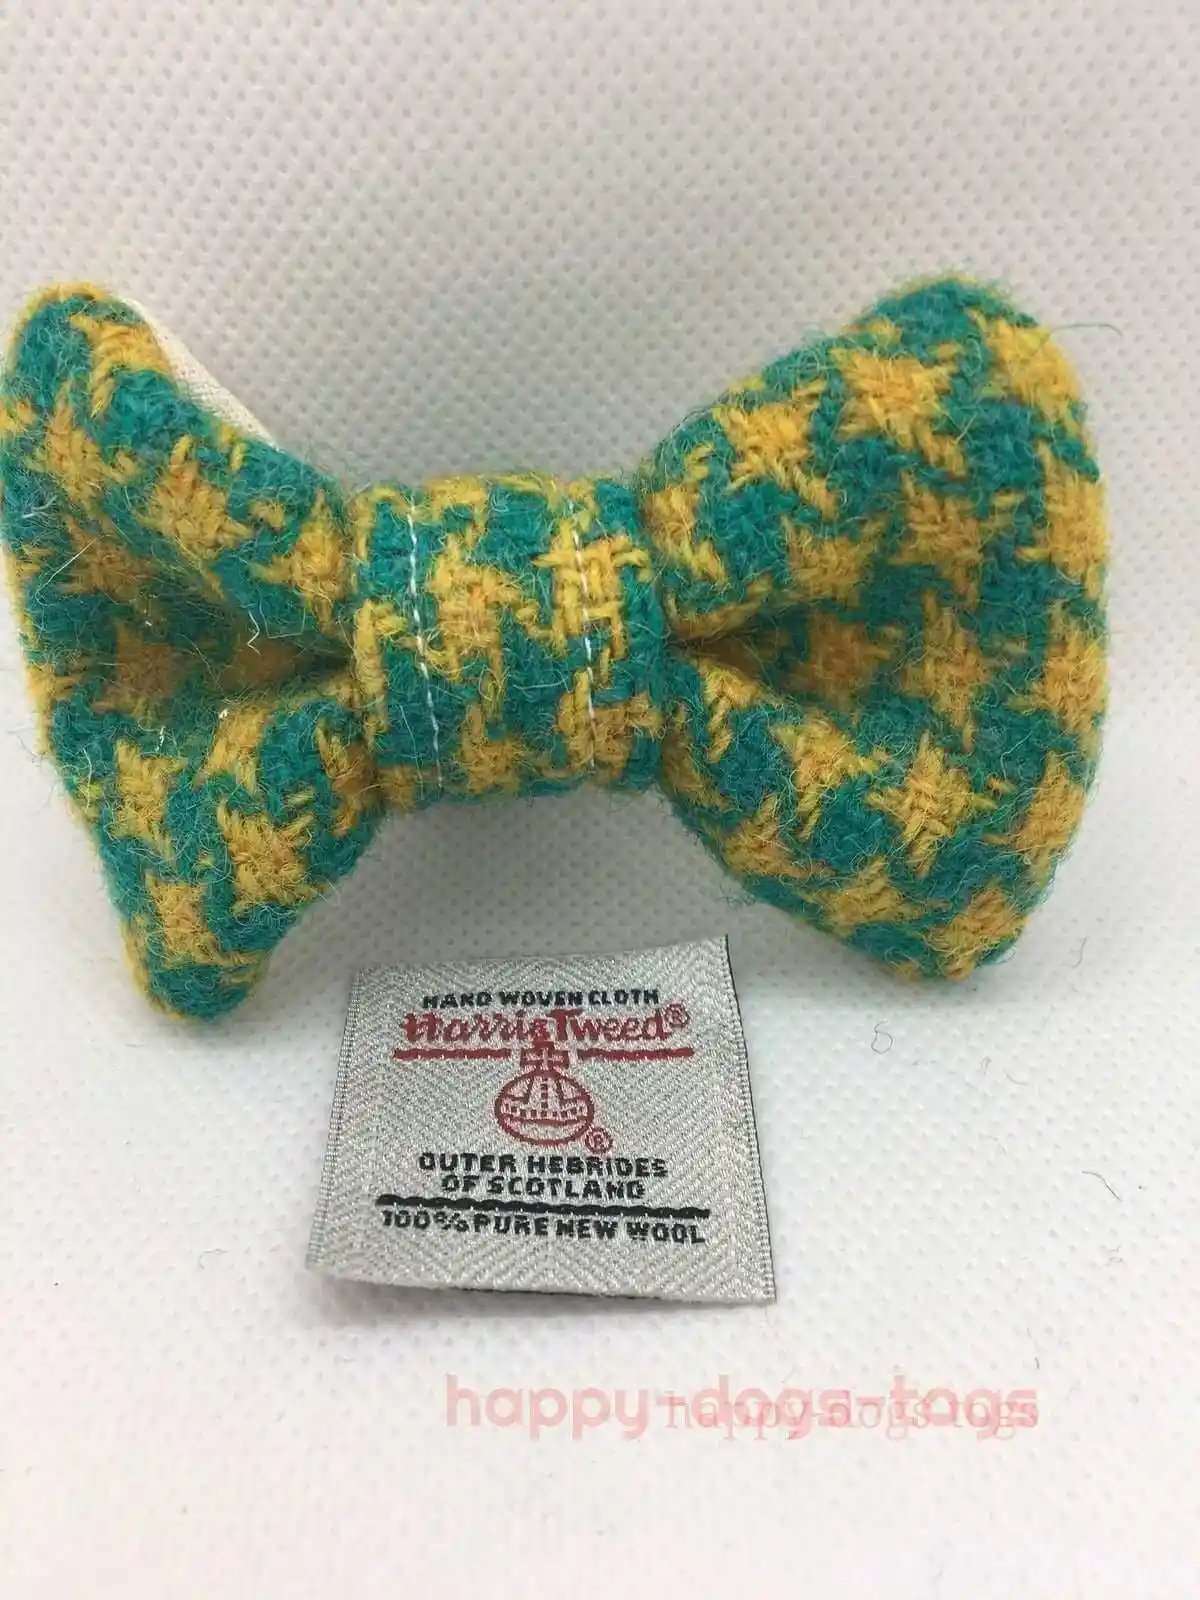 Small Harris Tweed dog bow tie in Green and Yellow Houndstooth